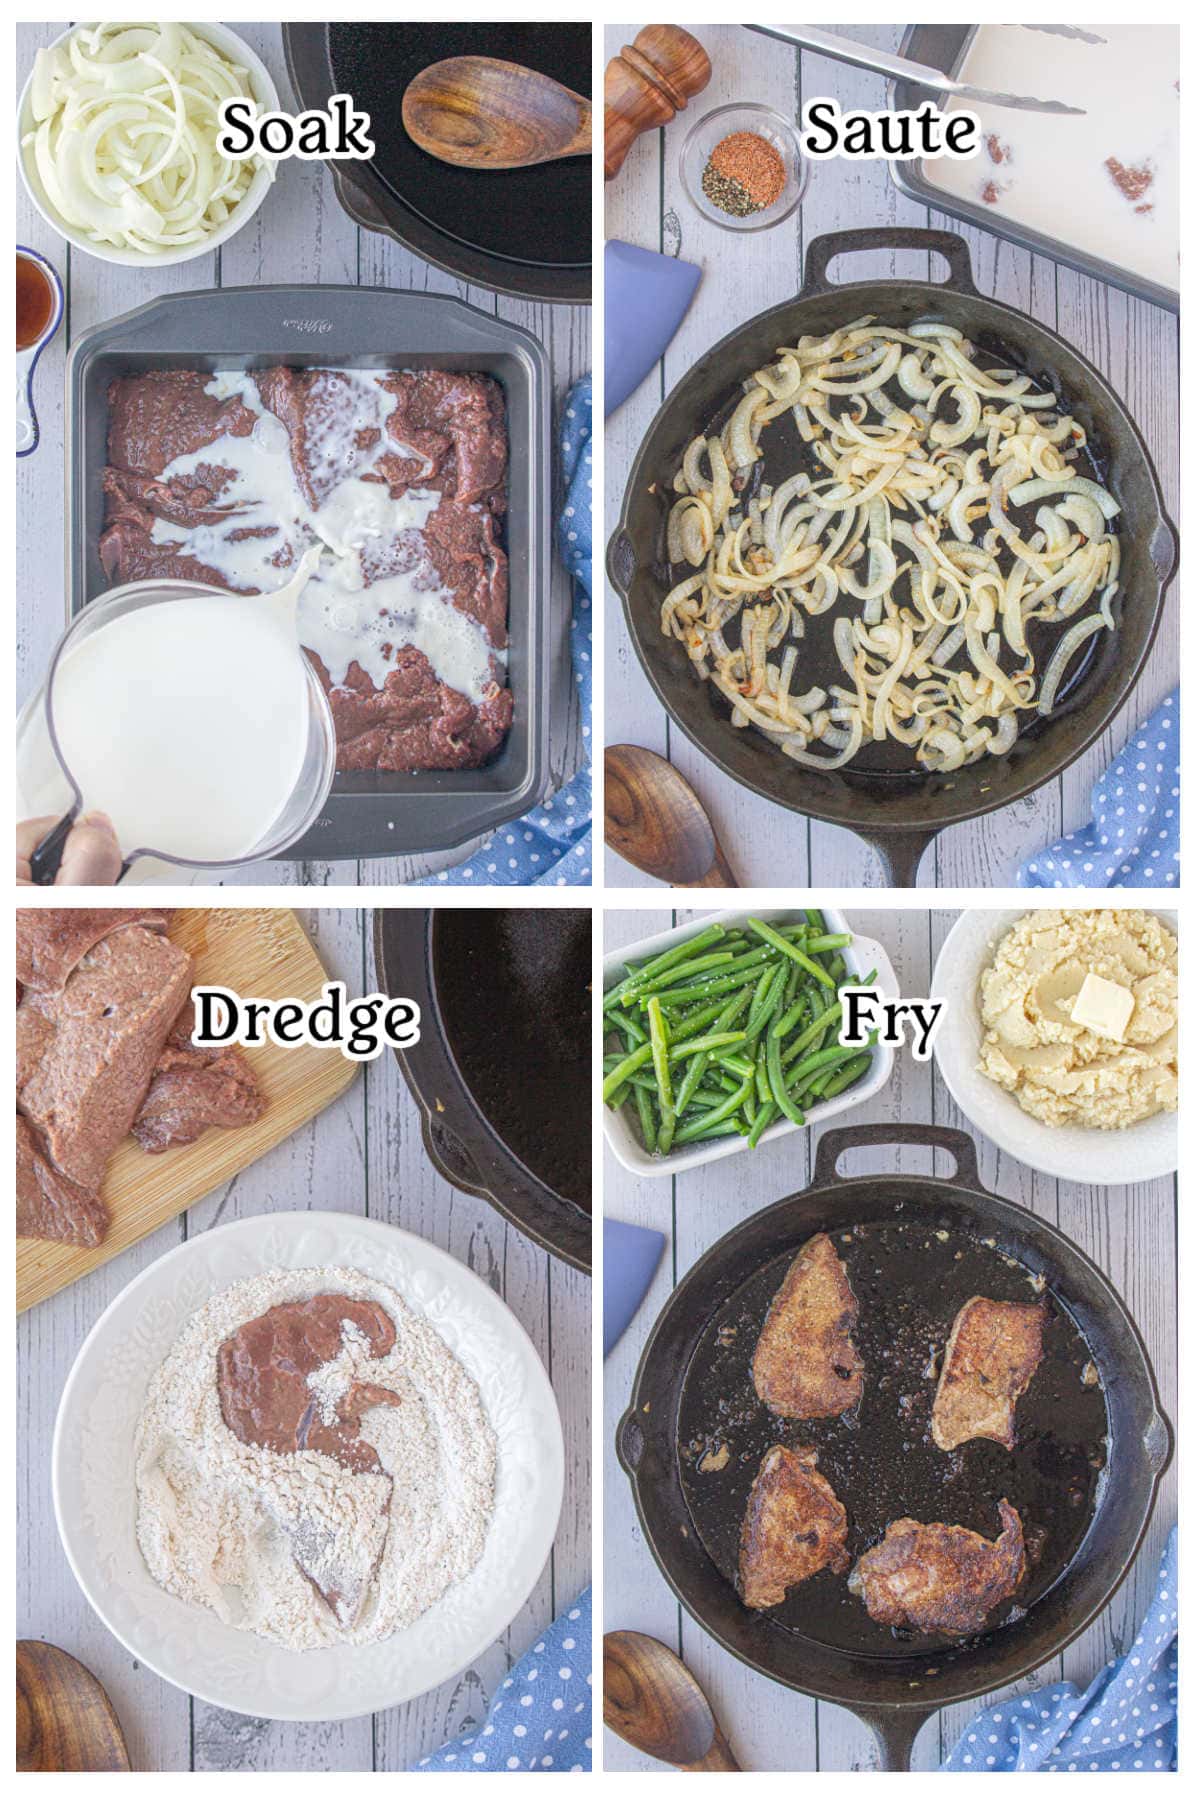 Four recipe steps showing how to make the liver and onions with text overlay.